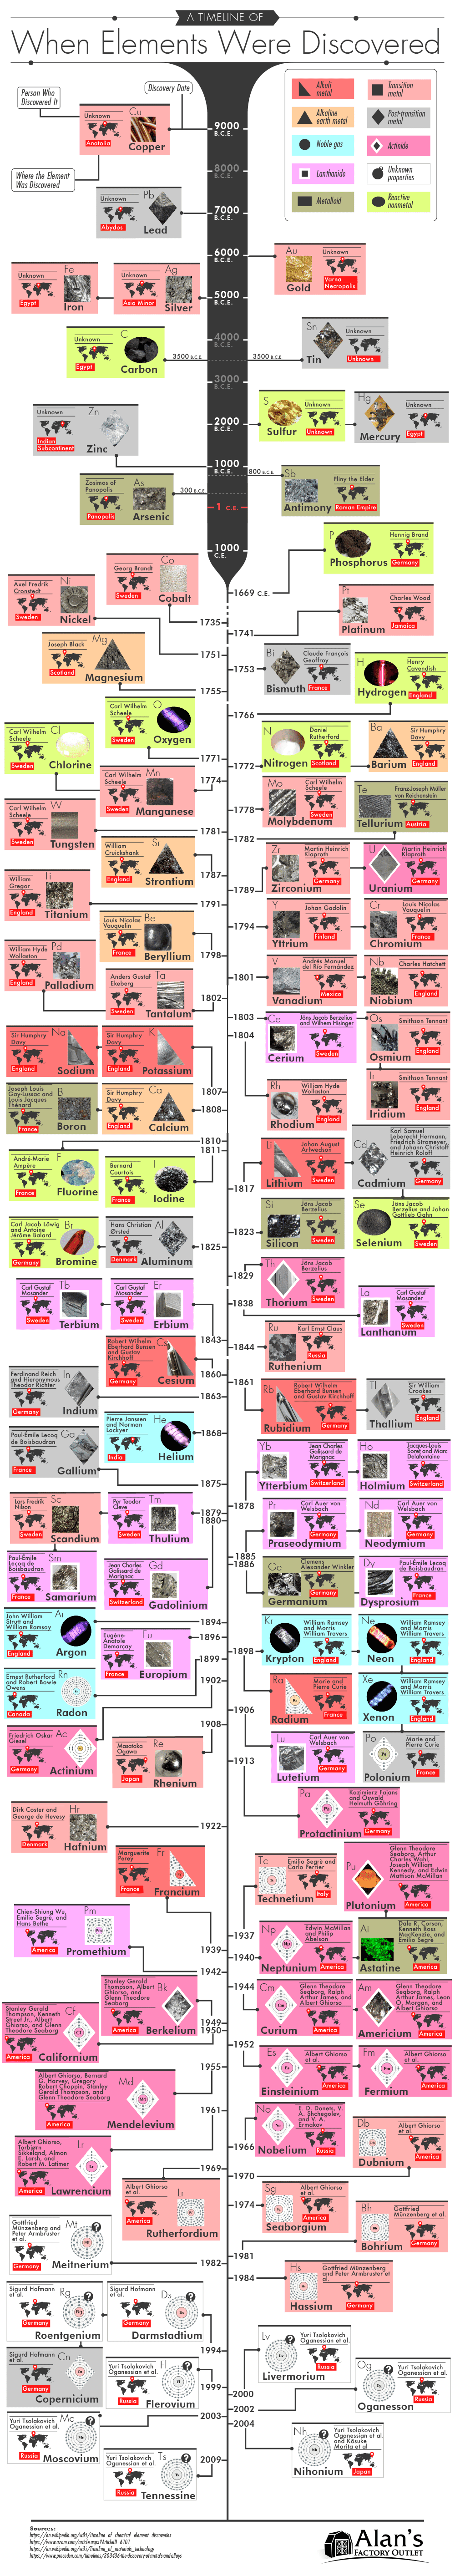 A Timeline of When Elements Were Discovered and Who Discovered Them